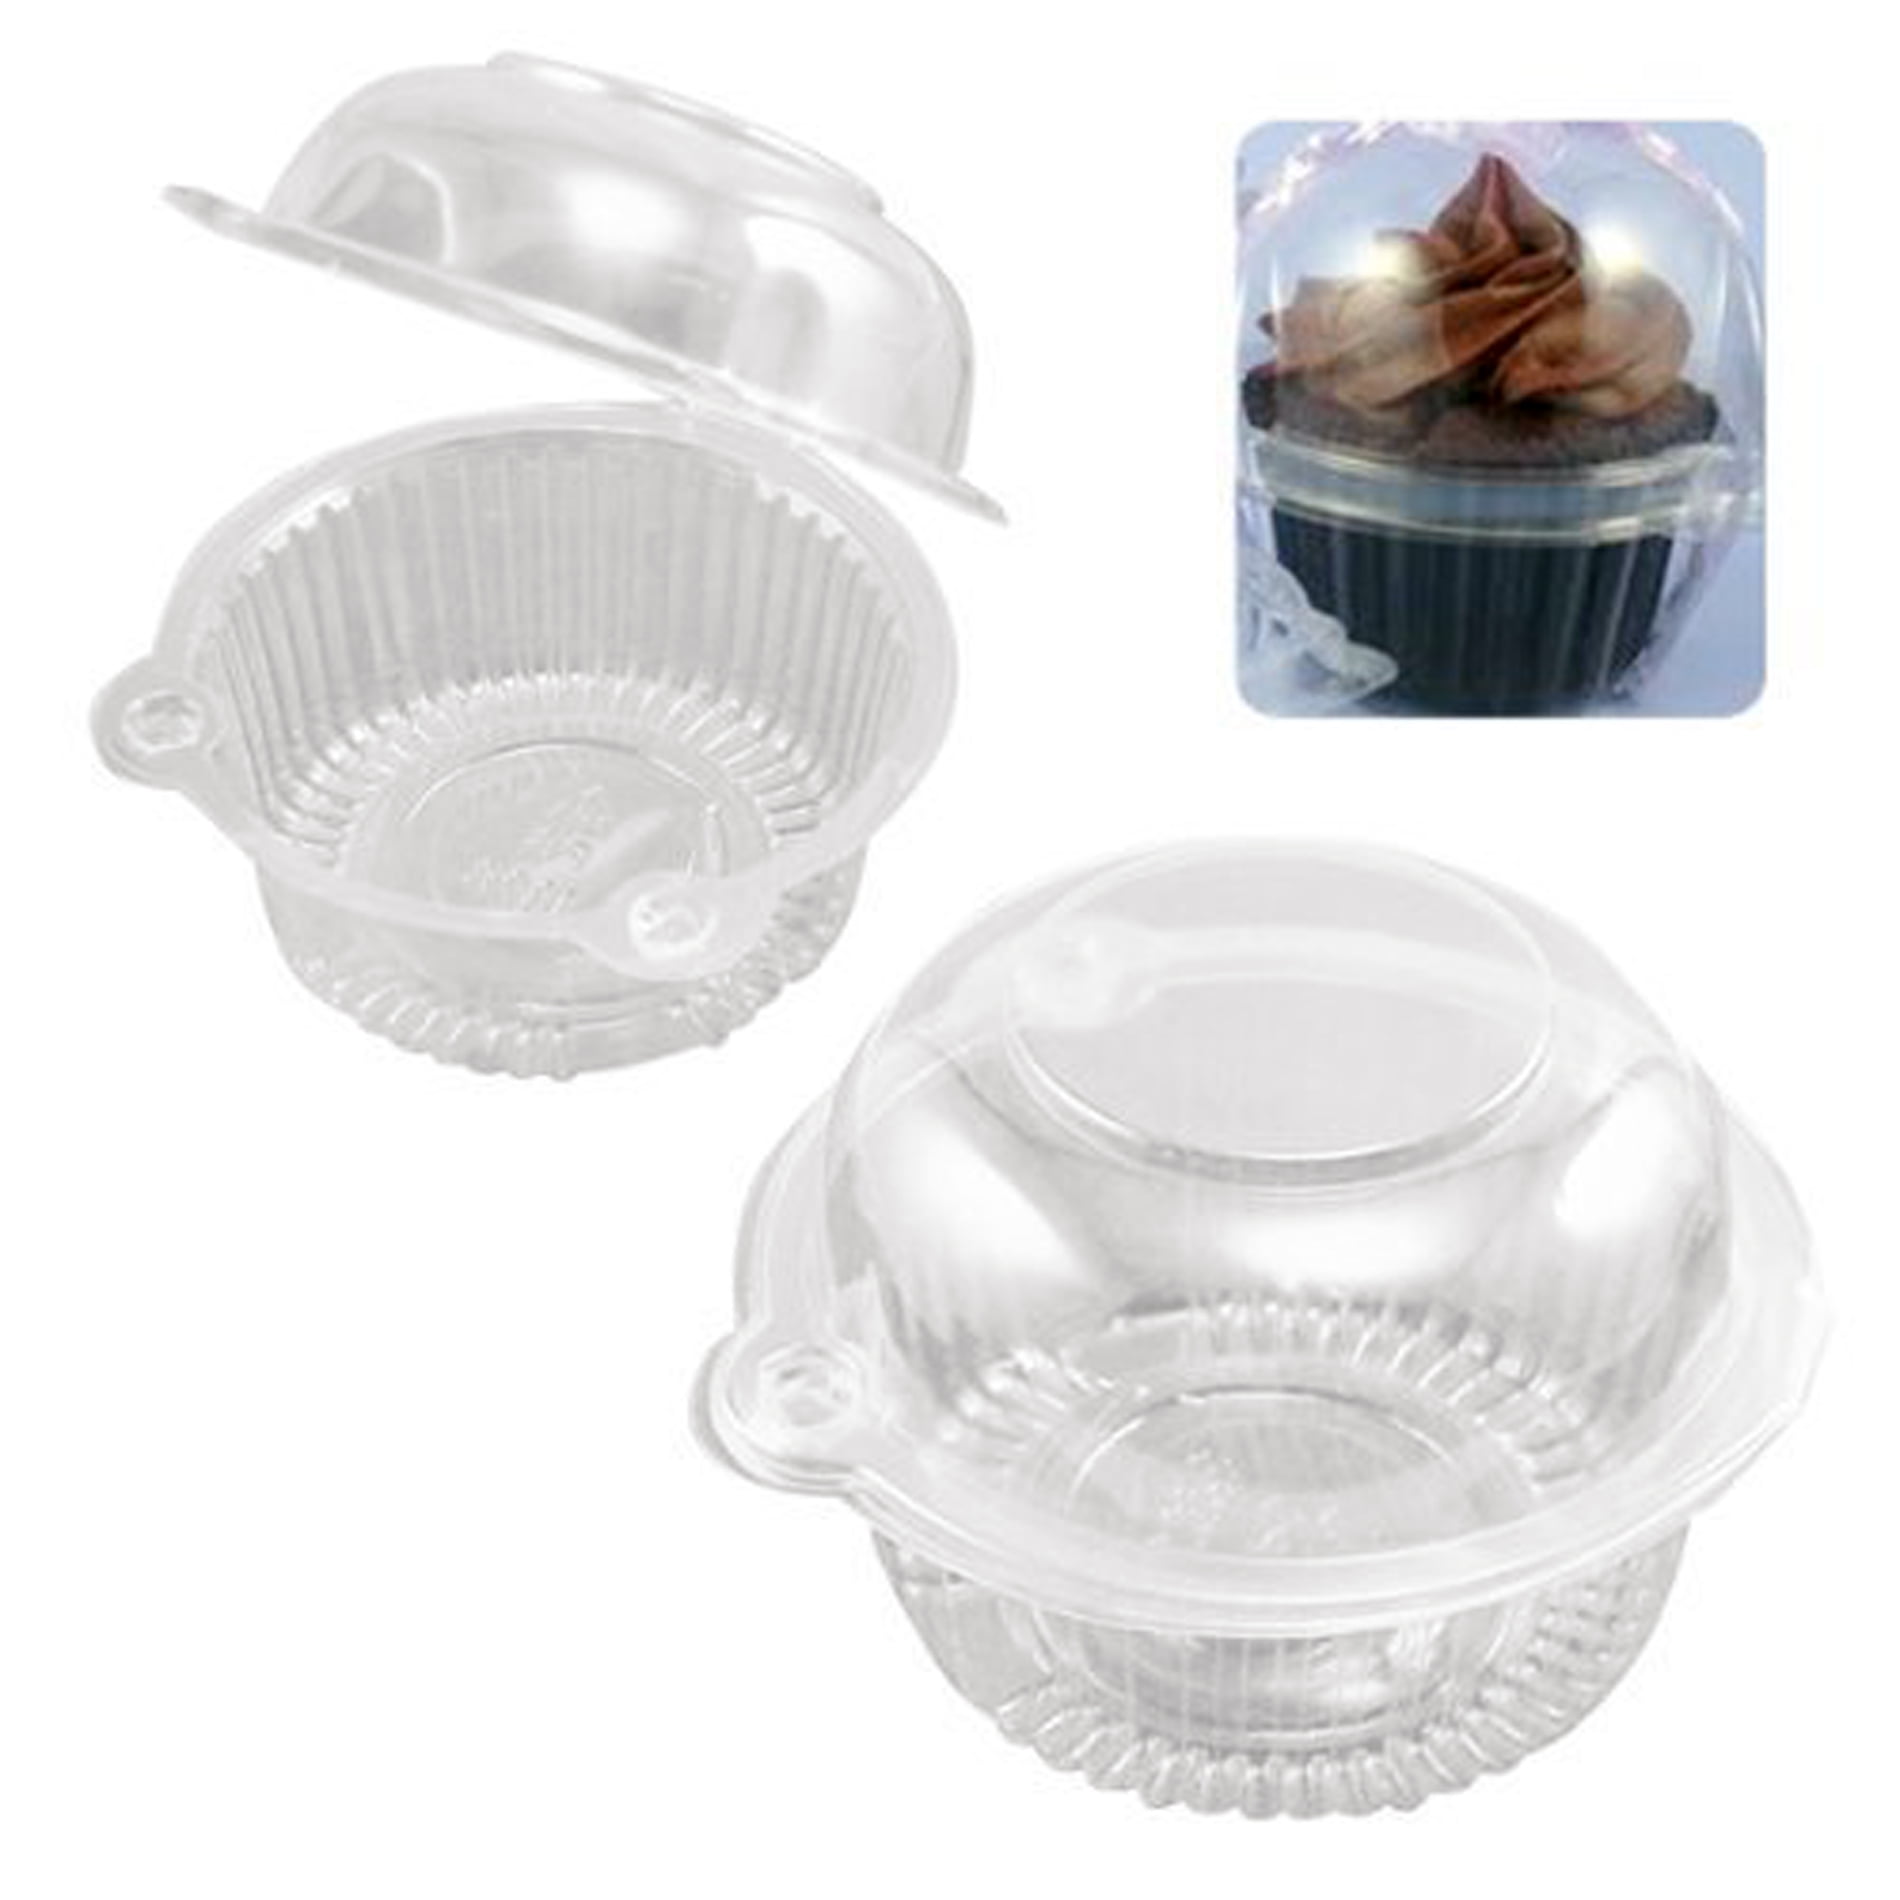 50 Clear Transparent Muffin/Cupcake Box Holder Food-Safe PET Container w/Dome Lid